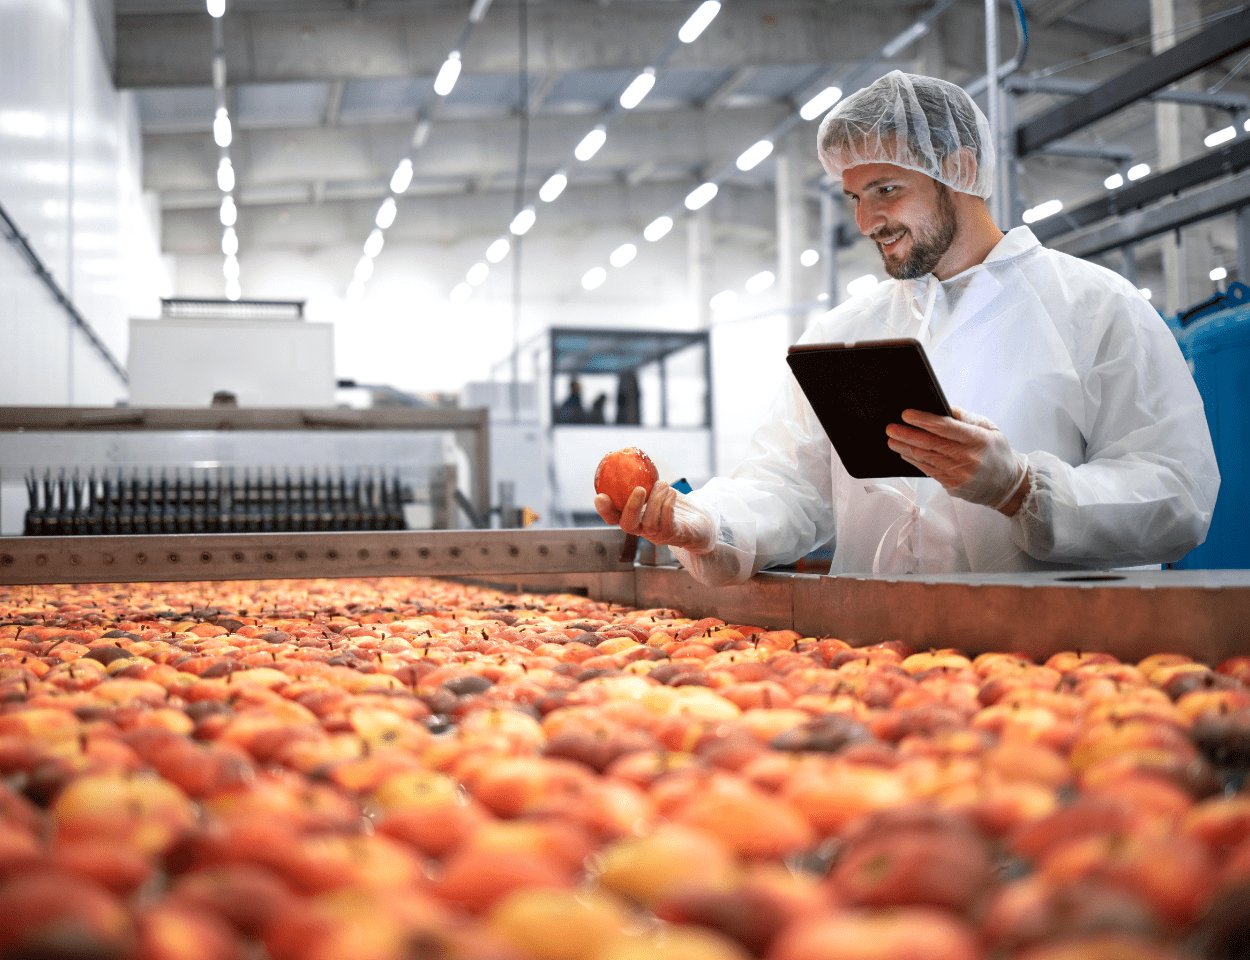 create robust Food Safety control Plans with CIKLab